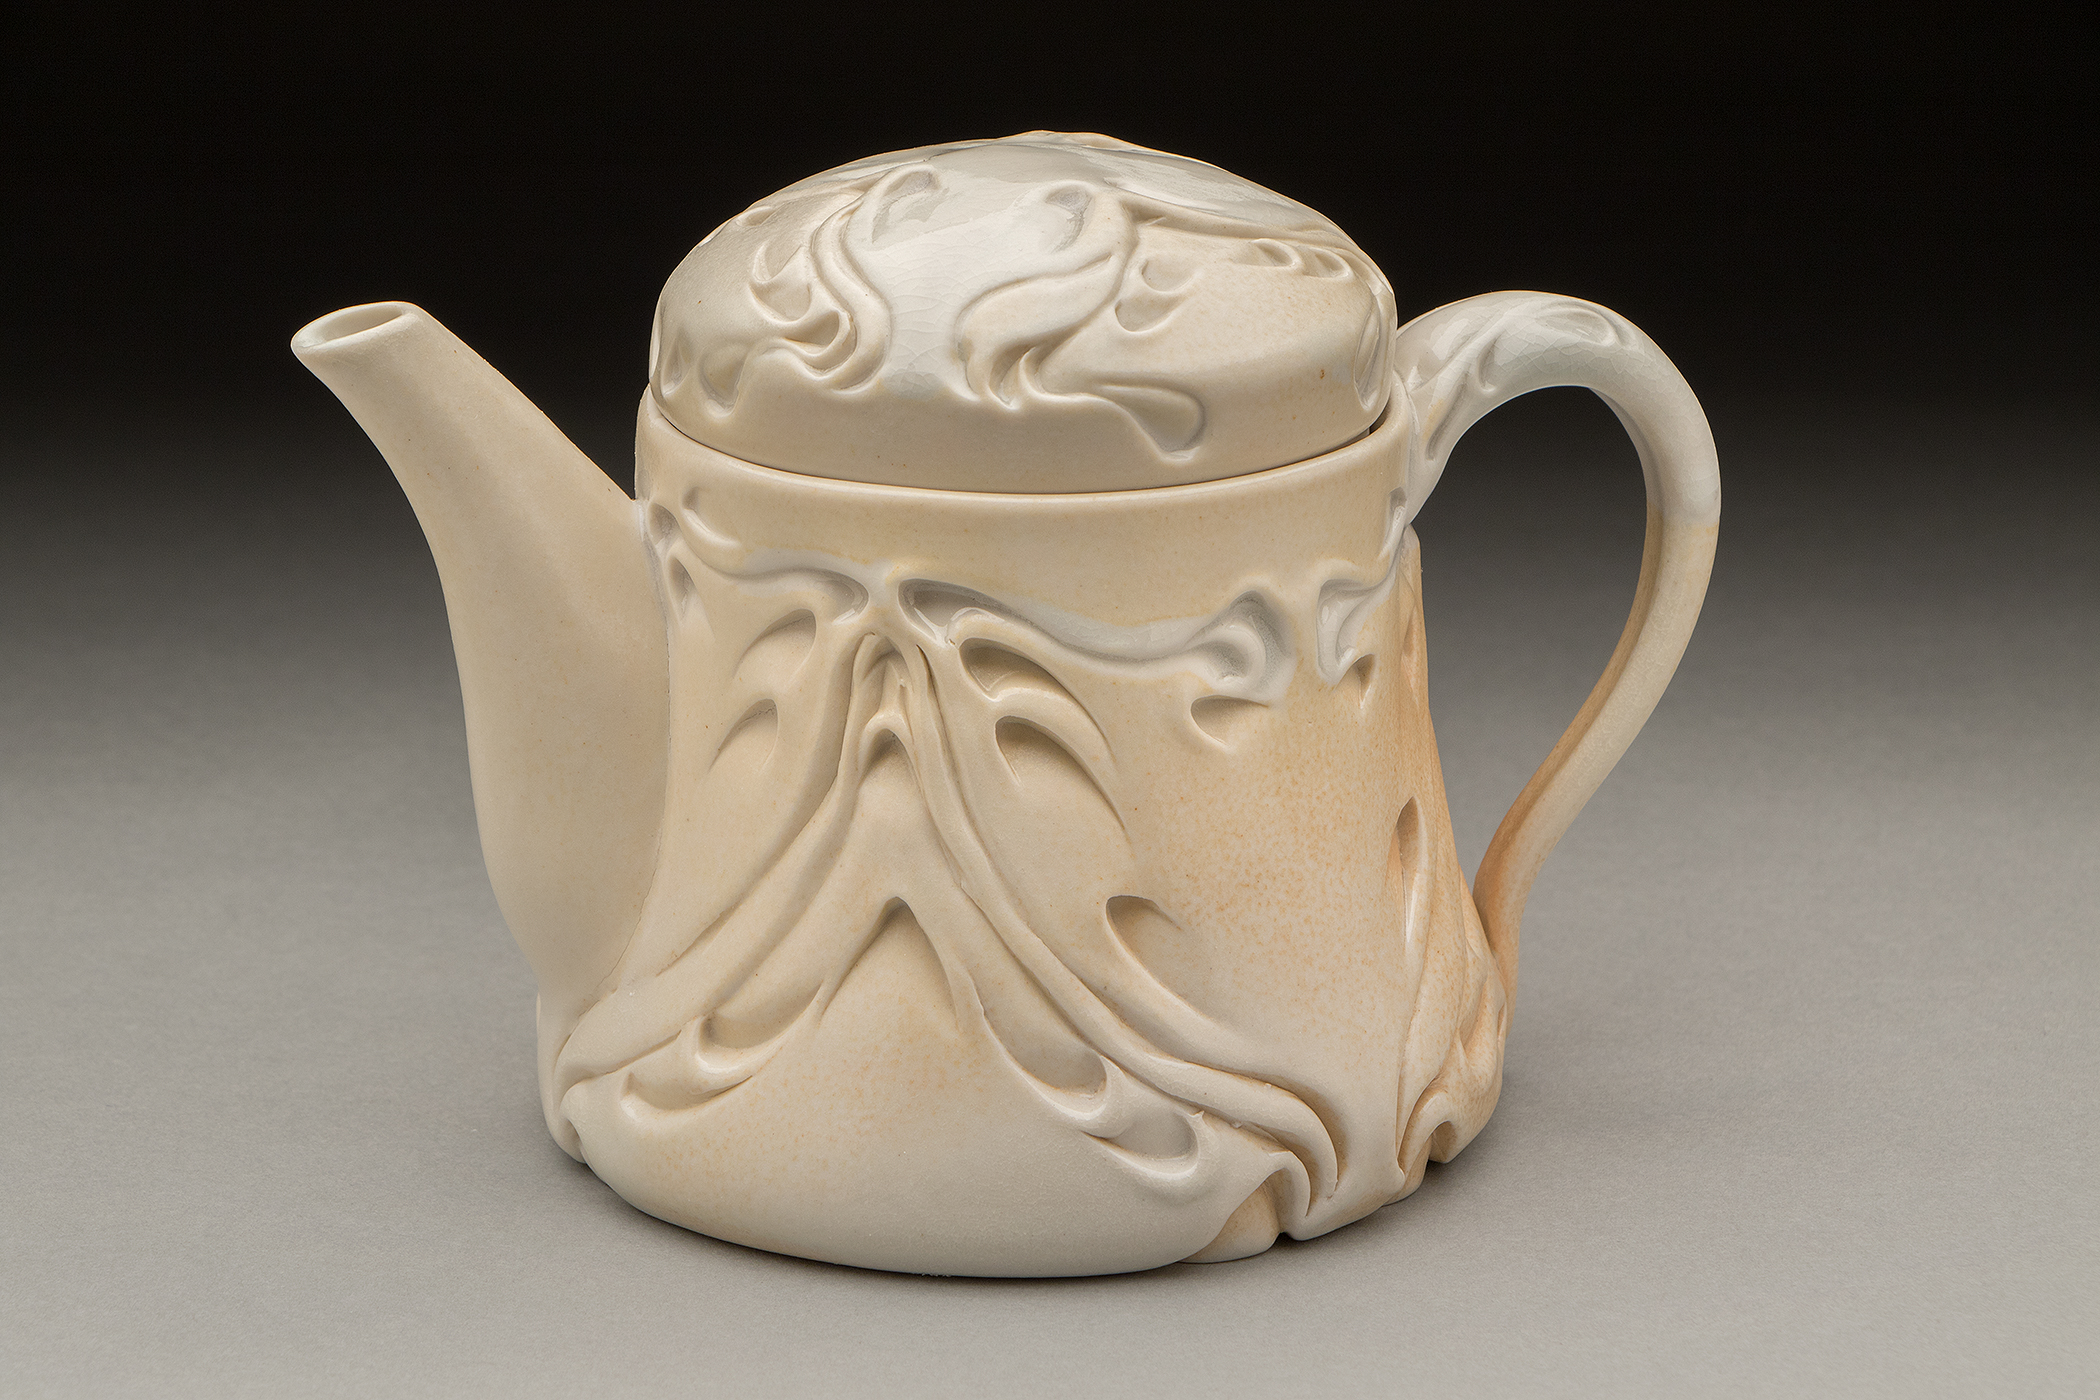 Lora Rust, Ivory Nouveau Teapot, 7 in. (18 cm) in height, porcelain, soda fired to cone 7